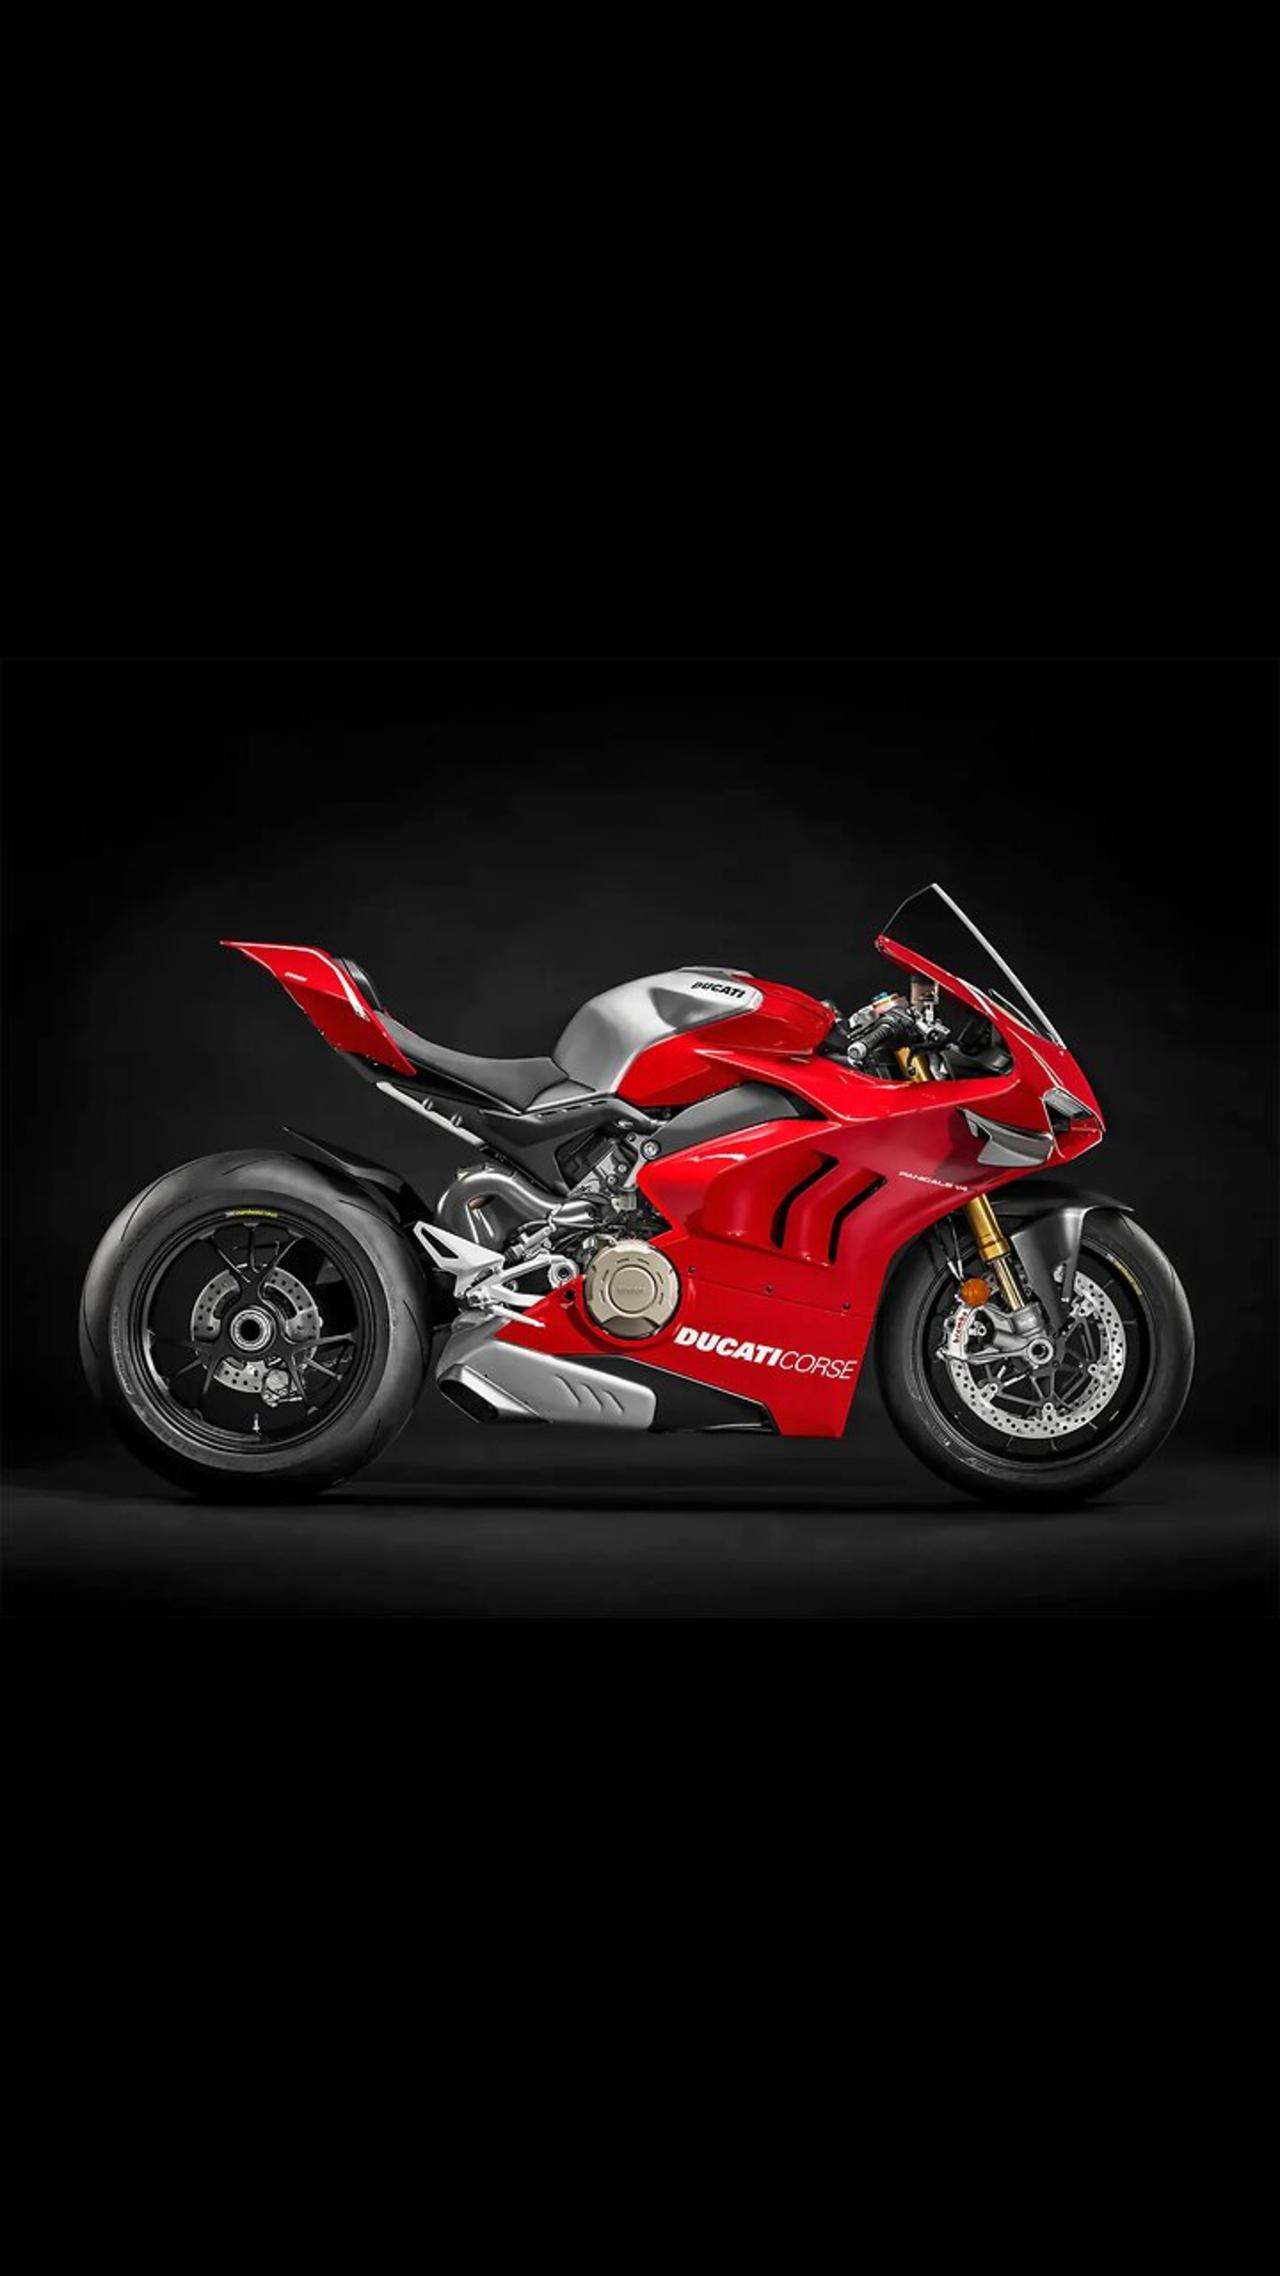 PANIGALE V2 The Red Essence. Now in Black